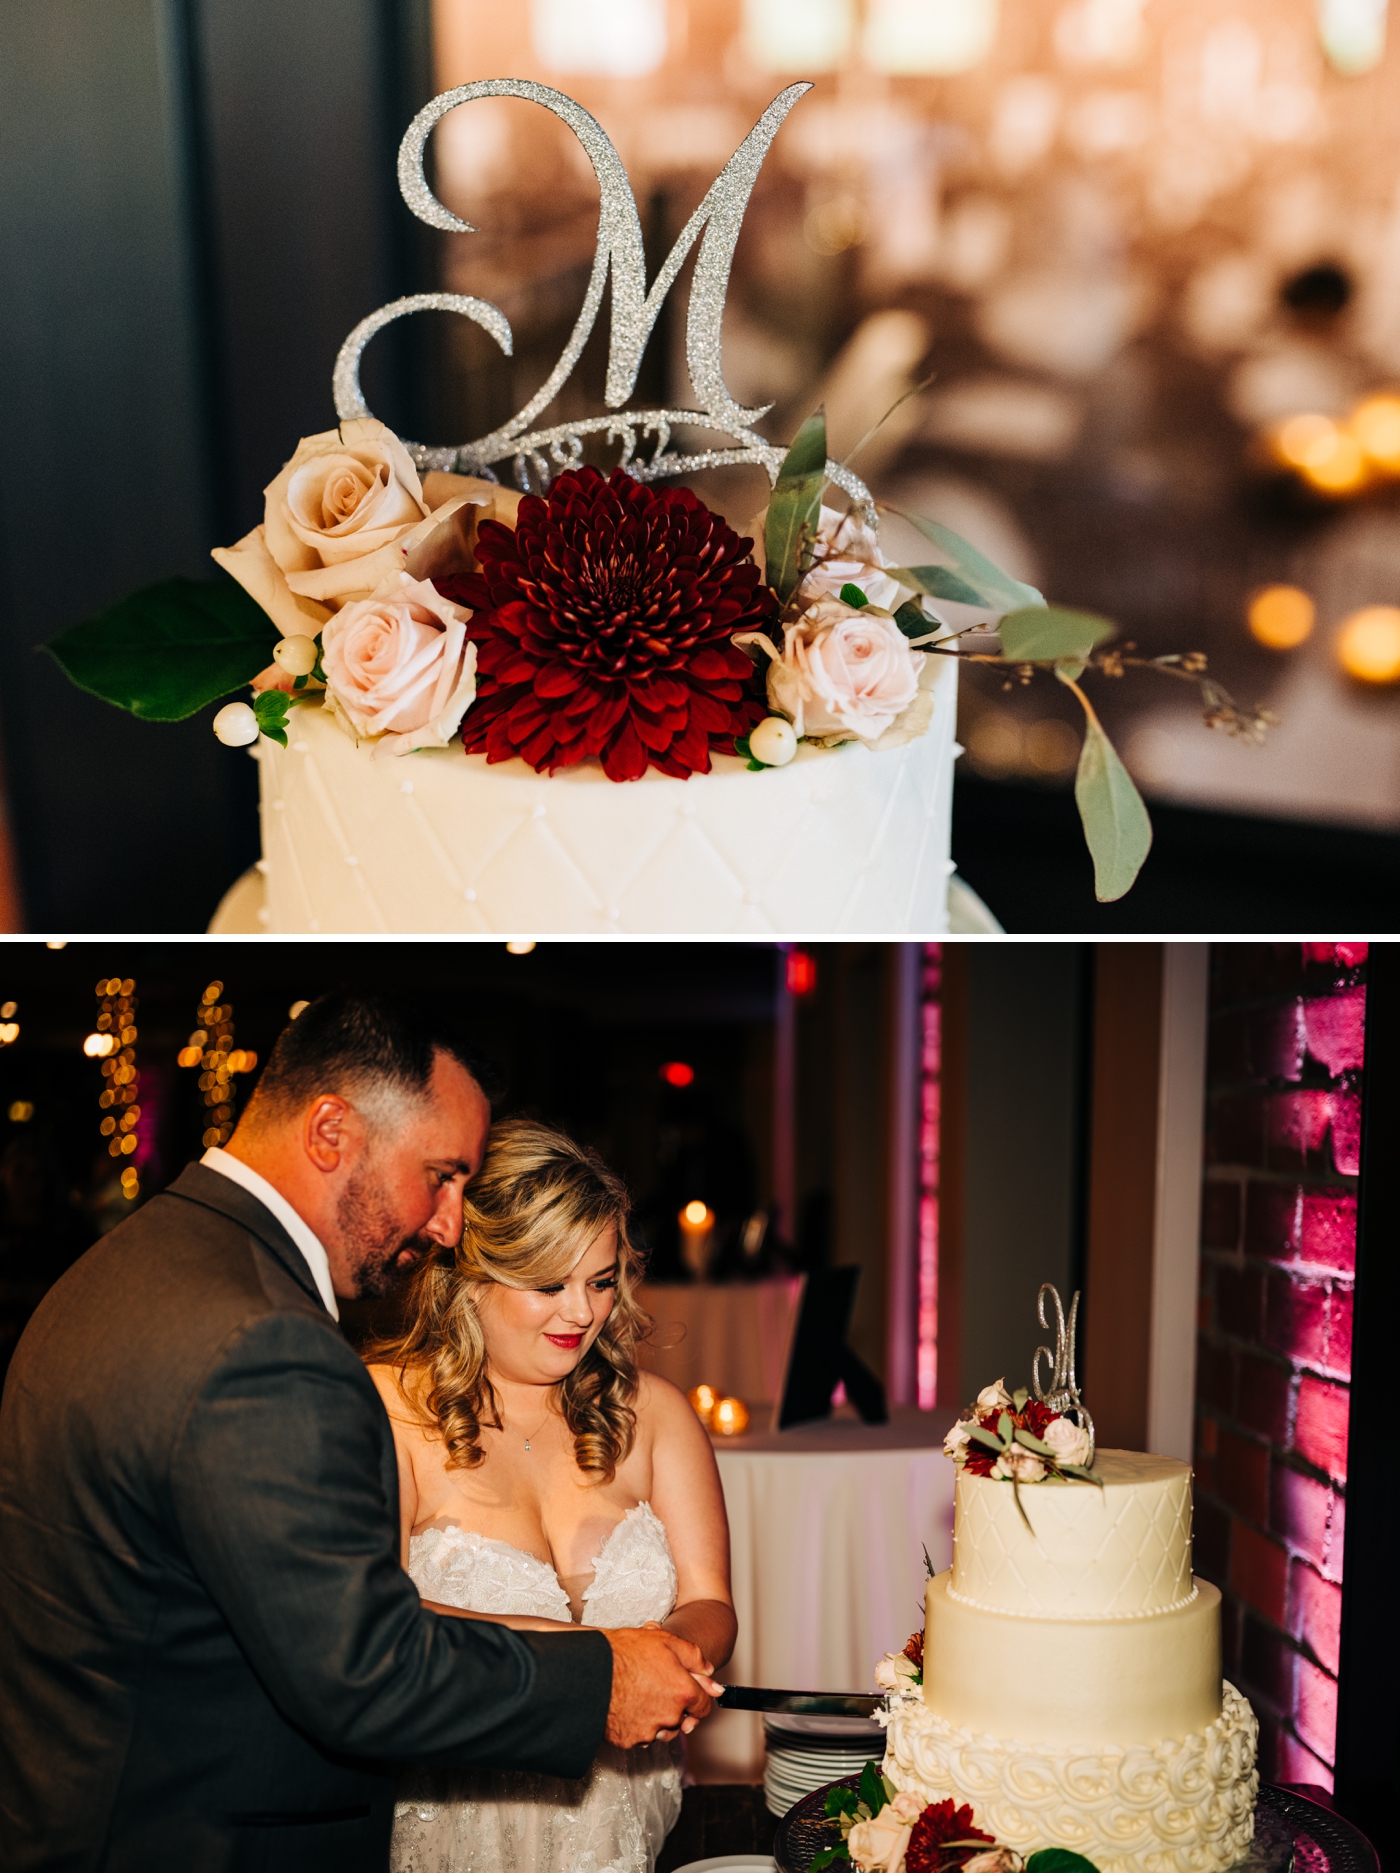 Bride and groom cutting their white wedding cake with blush and wine colored flowers